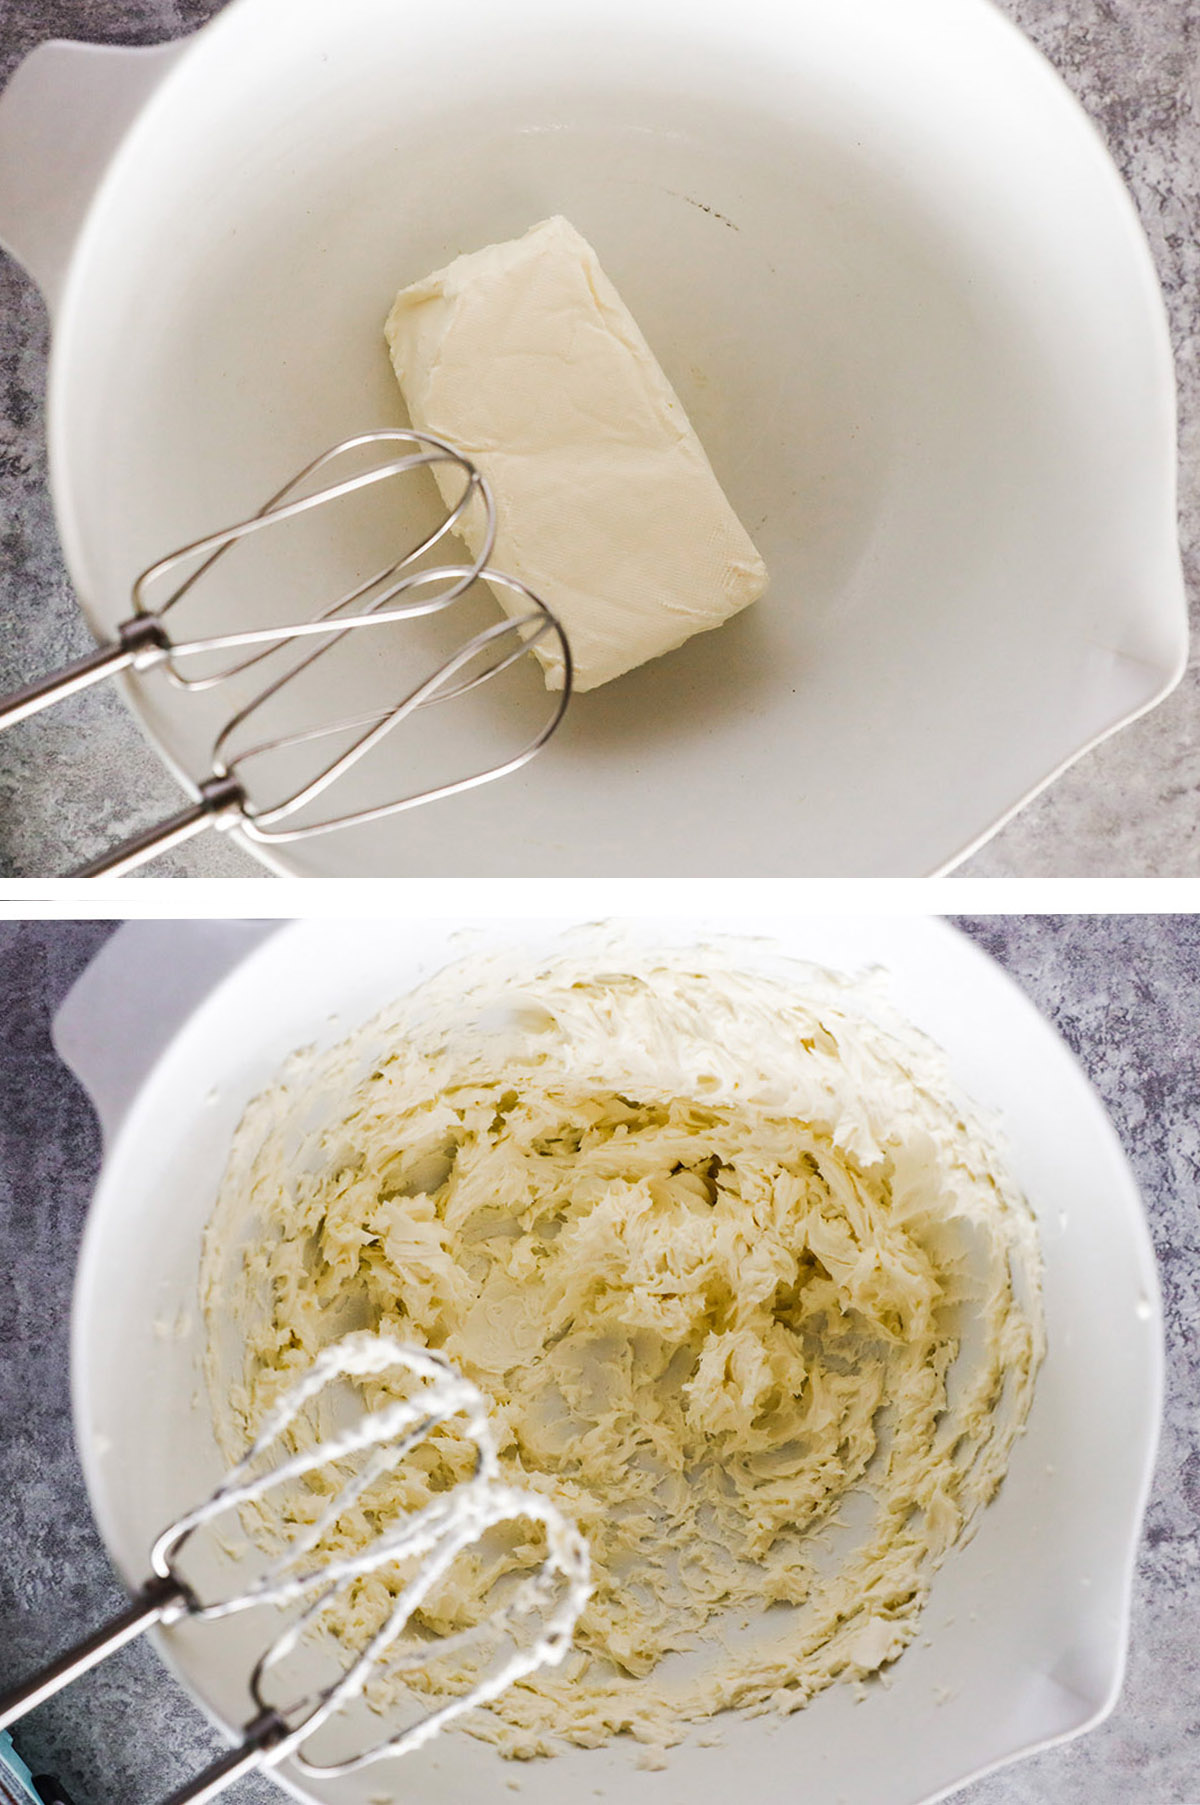 Cream cheese in a bowl with electric mixer. First unmixed then mixed